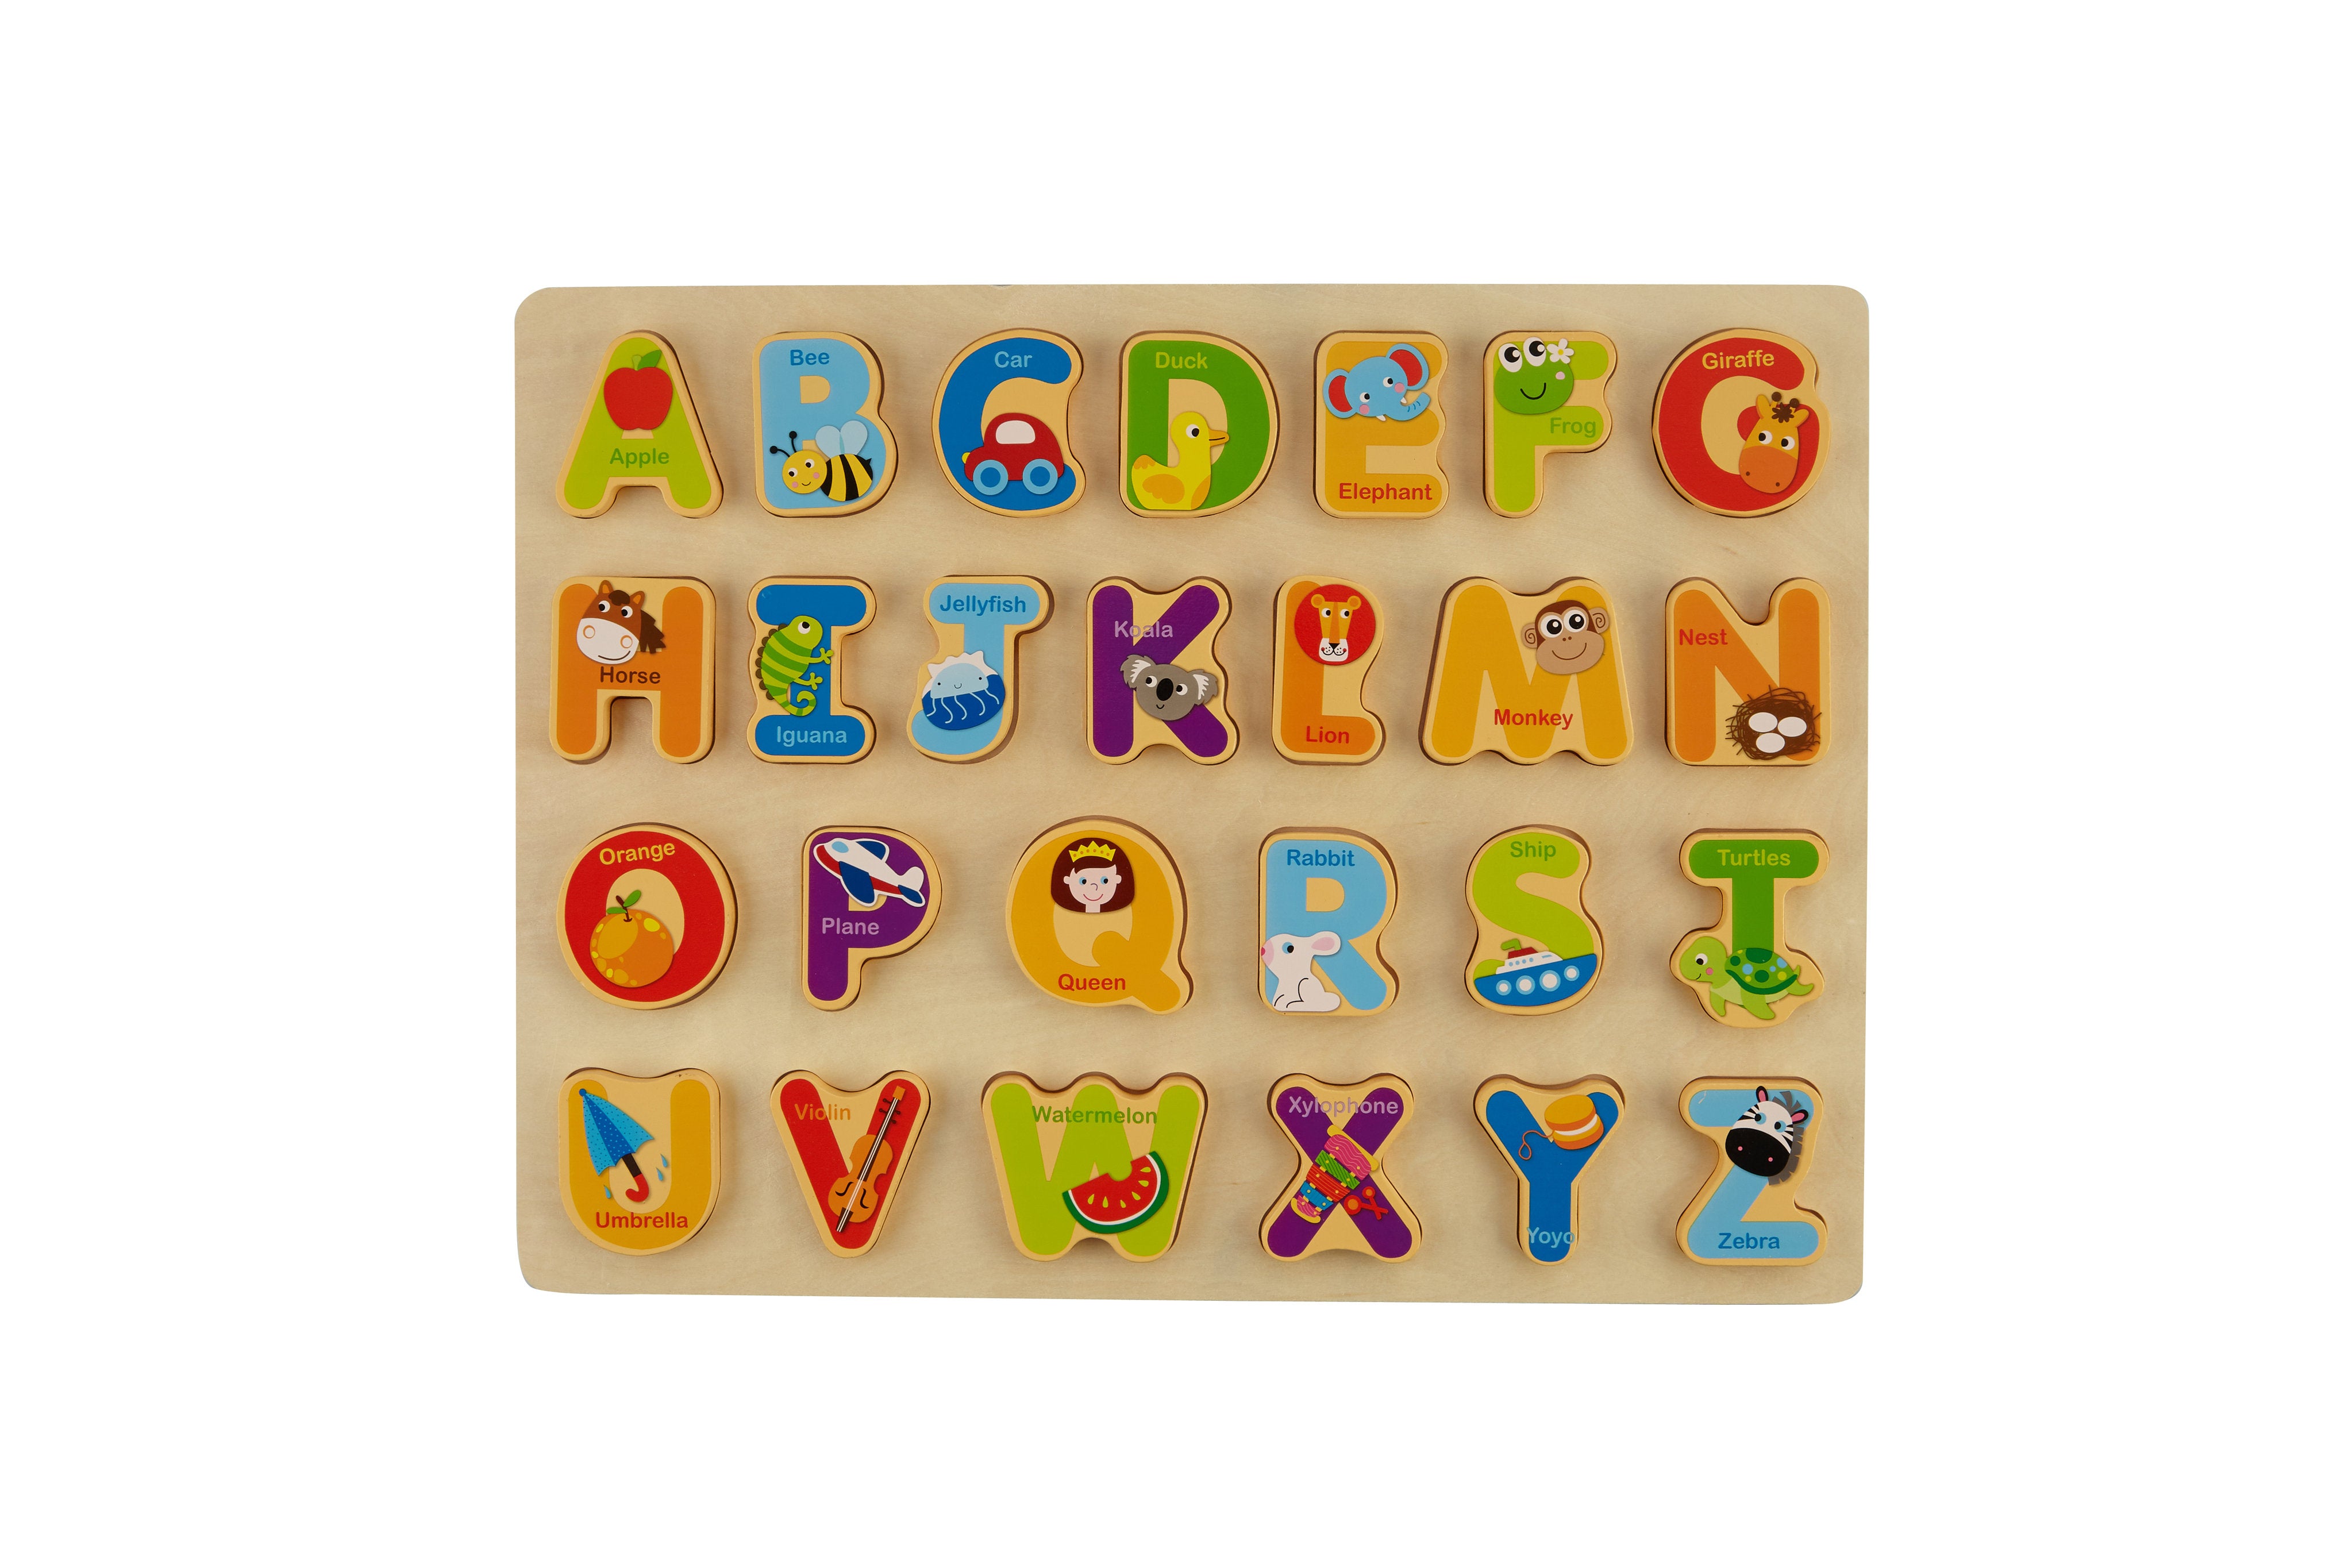 Toyster's Wooden Letters and Illustrative Adventure Learning Puzzle